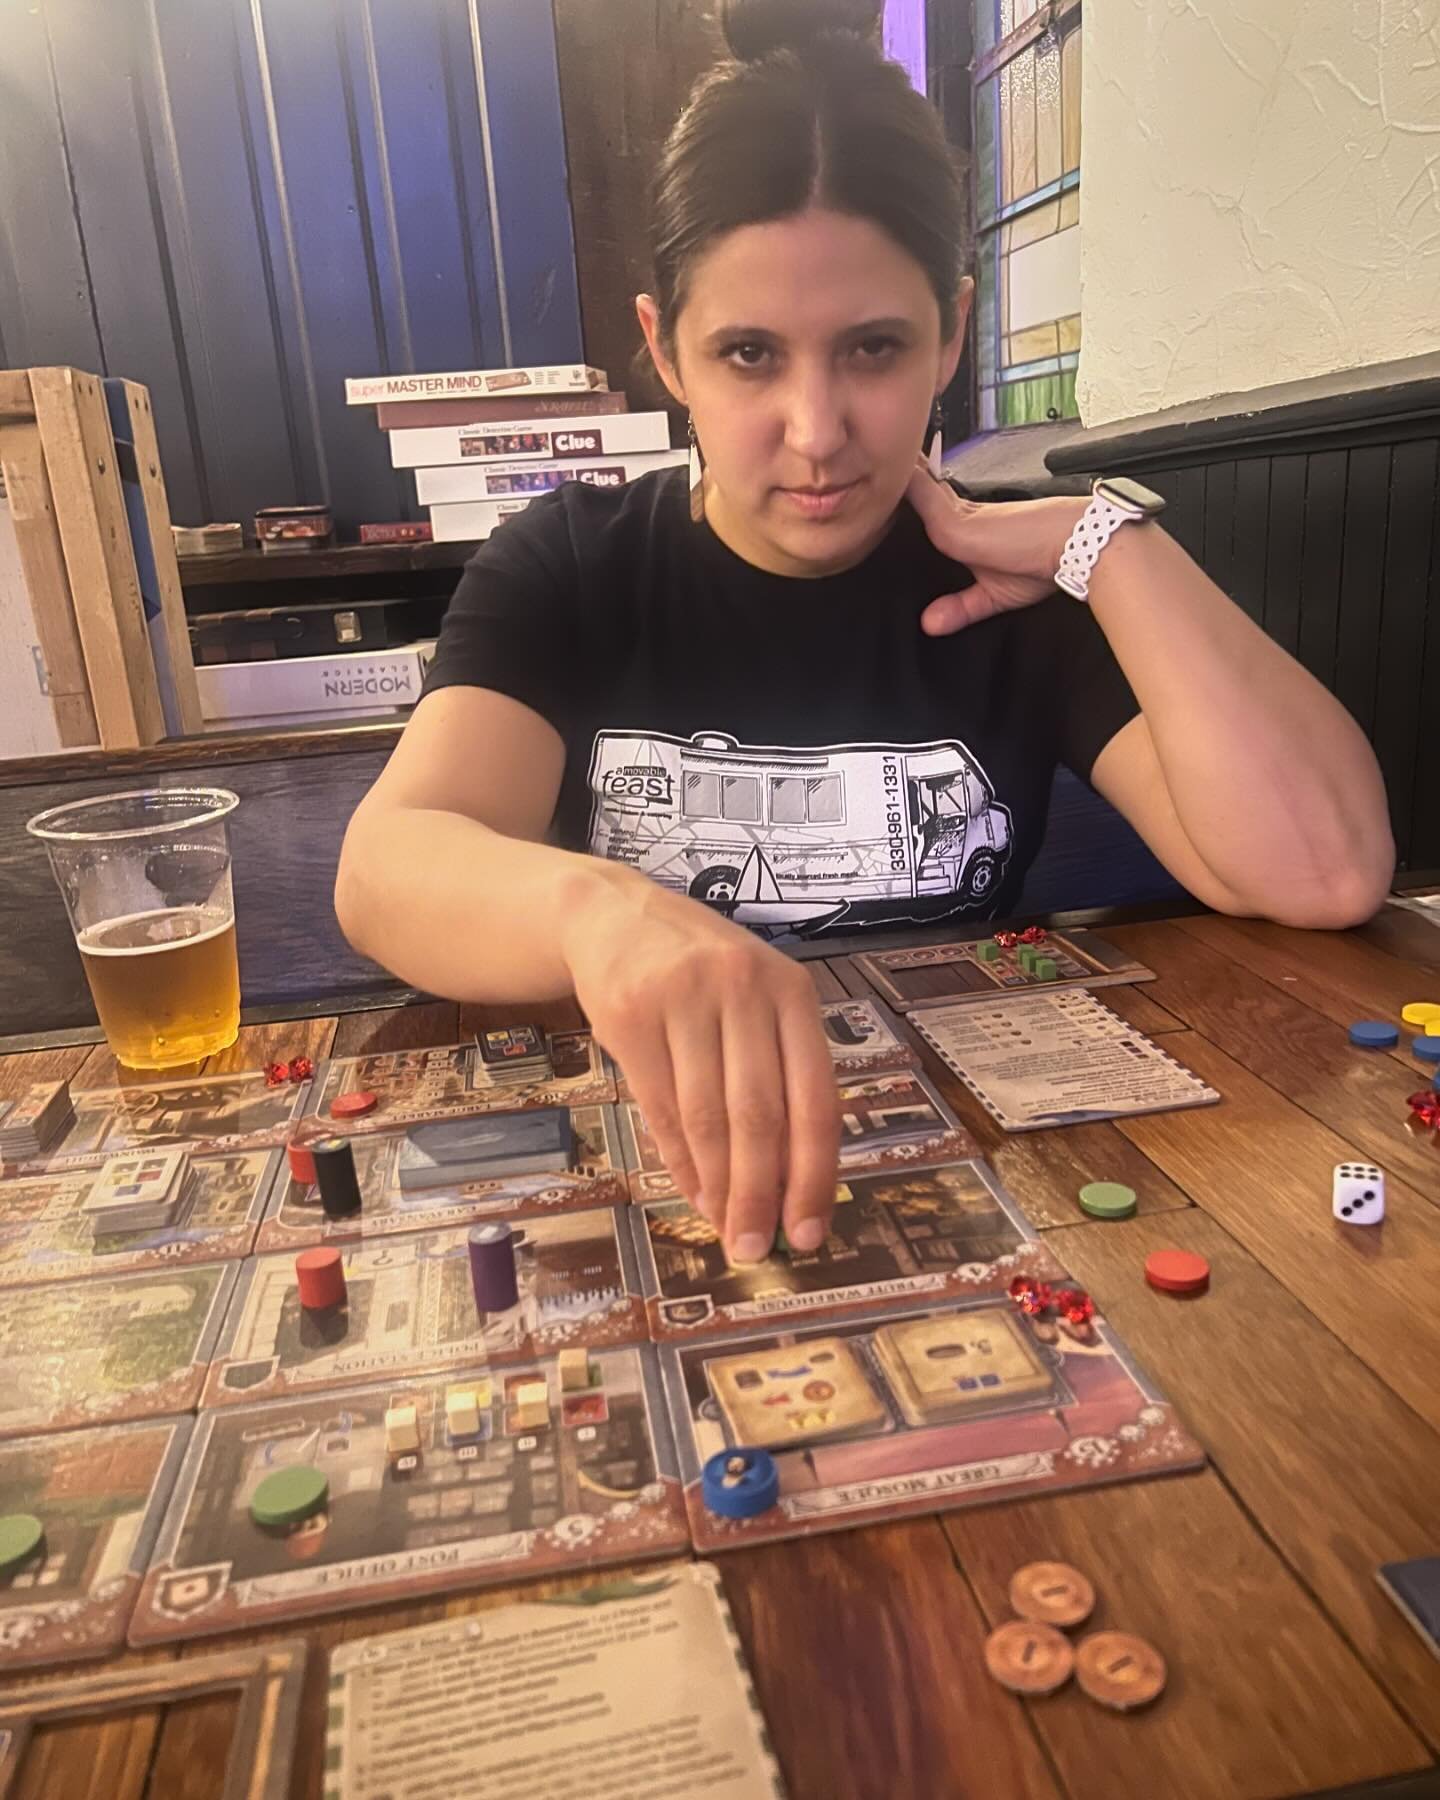 Last night at @noblecreaturebeer was all about Istanbul. Even though Kristina&rsquo;s a bit salty about her loss, we both can&rsquo;t wait to dive back into this captivating game soon! With its clever mechanics and nail-biting competition, Istanbul k